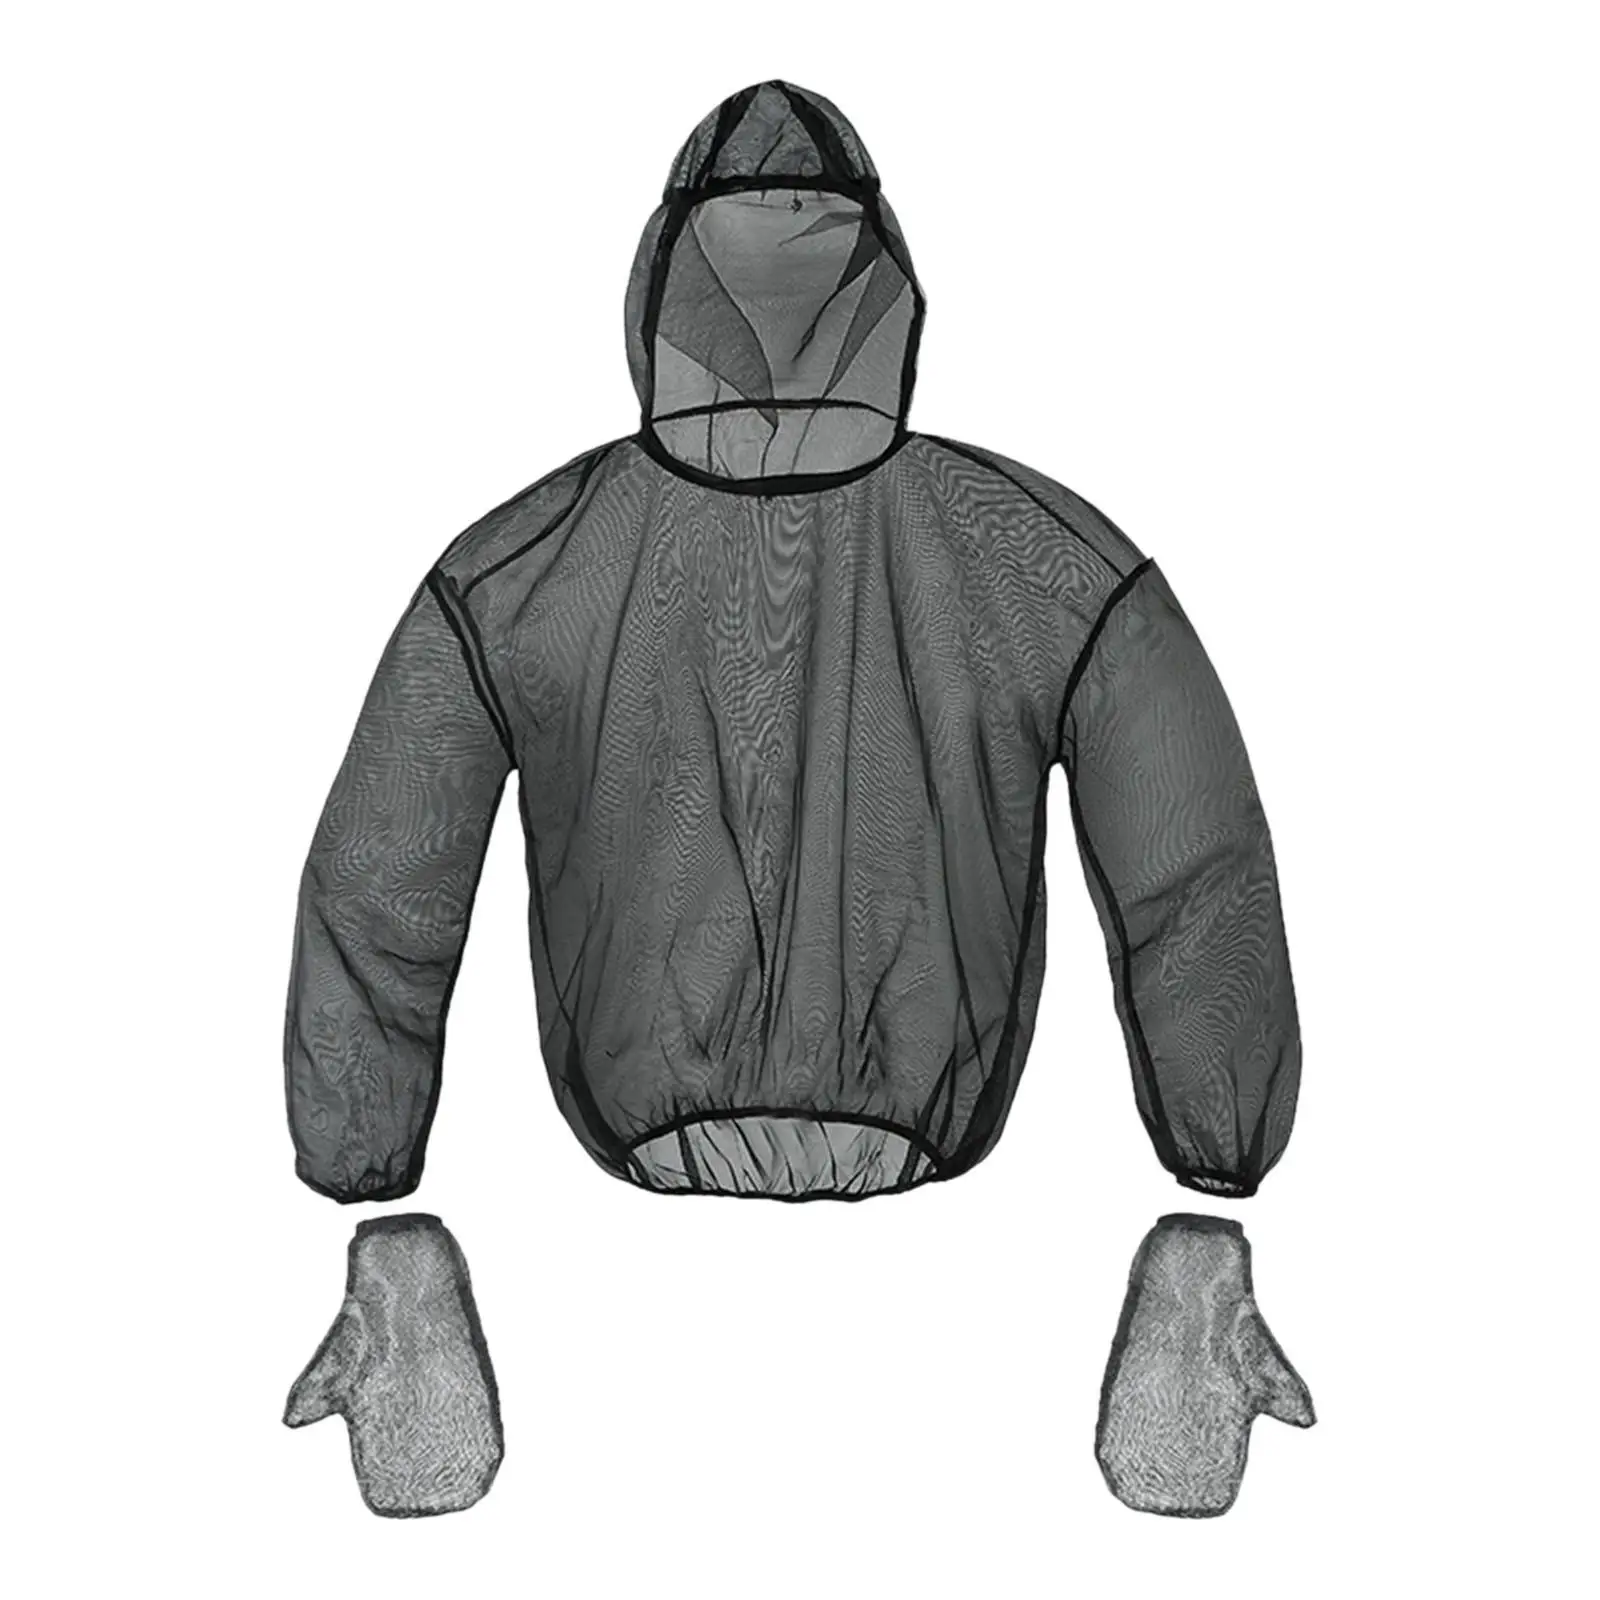 Hooded Jacket with Gloves Hood Fine Mesh Clothing Cover Protection for Hiking